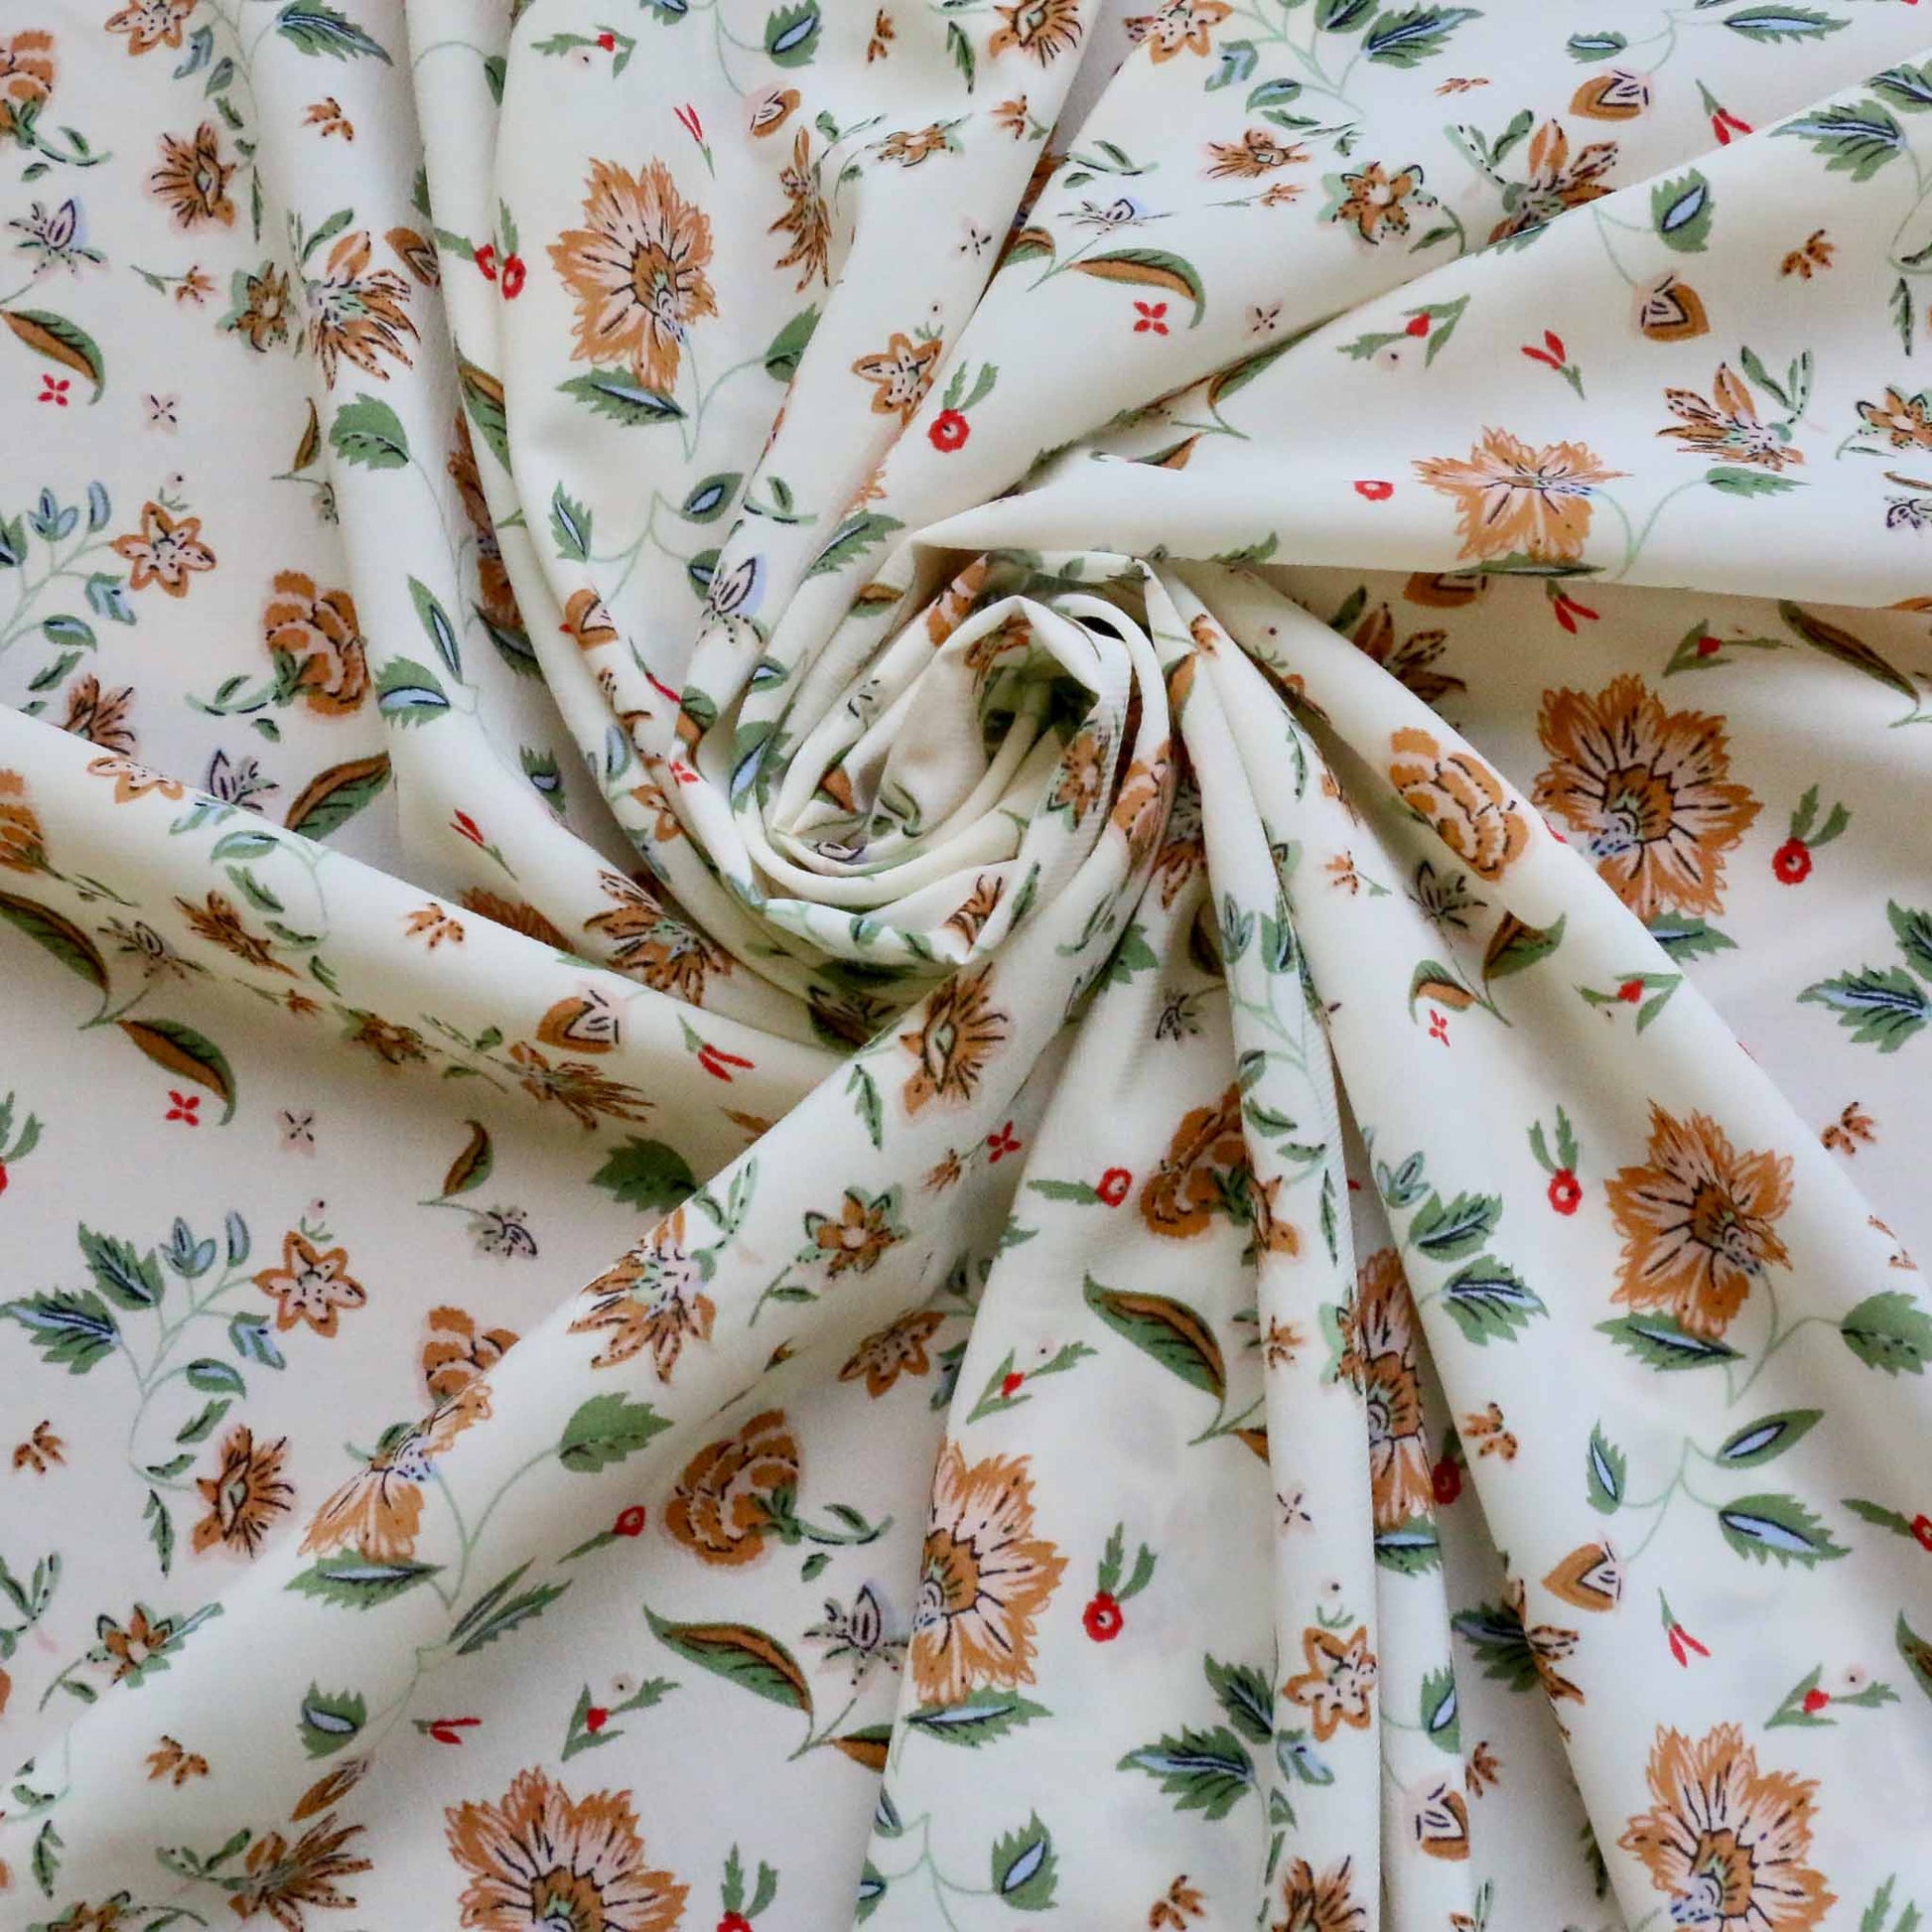 white floral stretchy chiffon dressmaking fabric with brown and green floral design